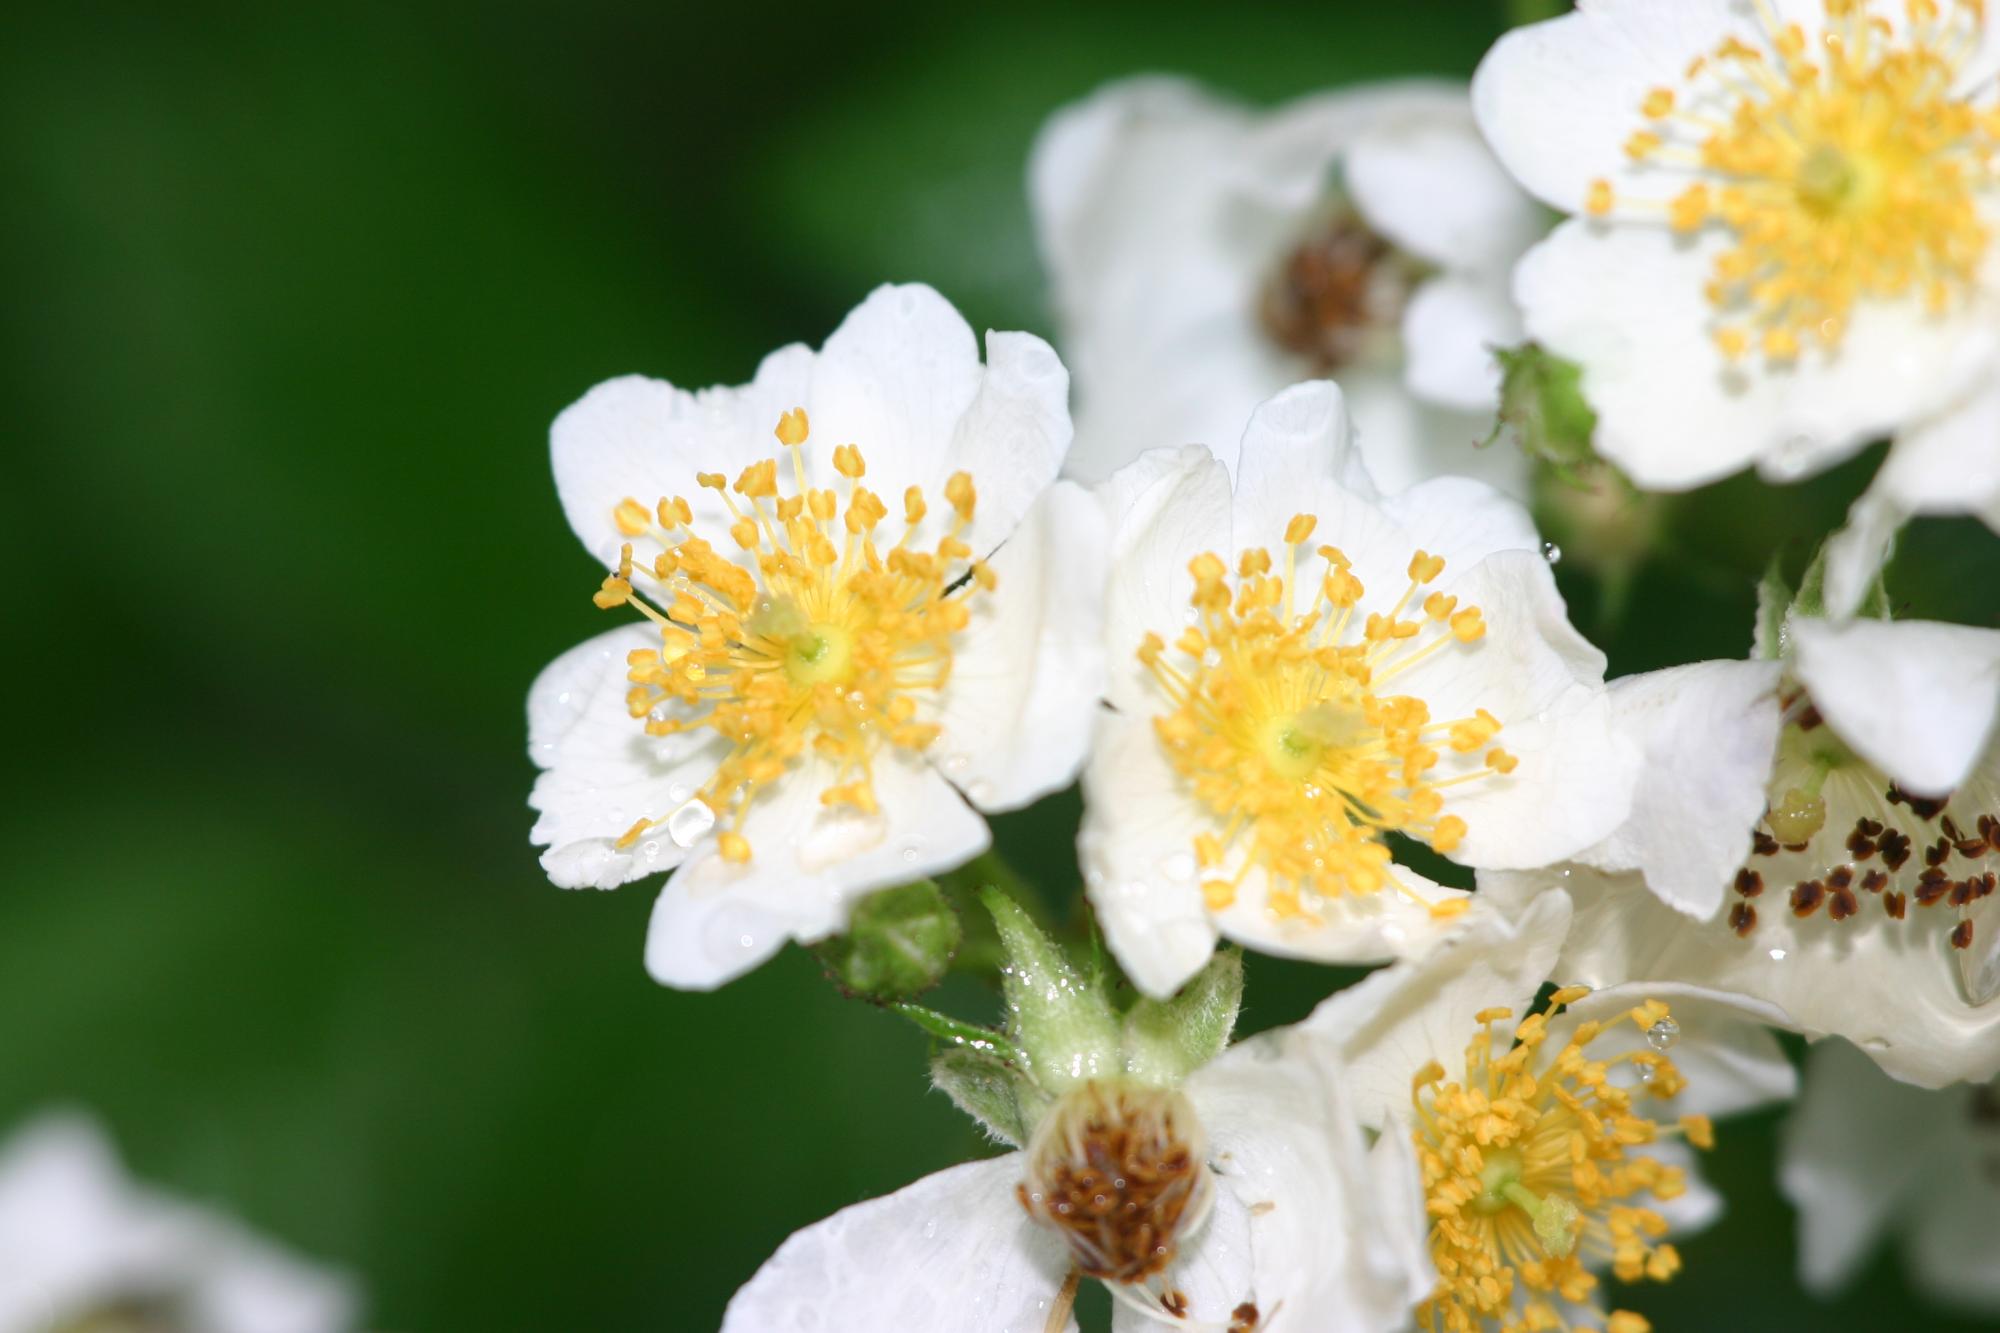 Beguilingly beautiful, the multiflora rose is actually an invasive species that crowds out native plants. | Photo by Tim McDowell of East Tennessee State University